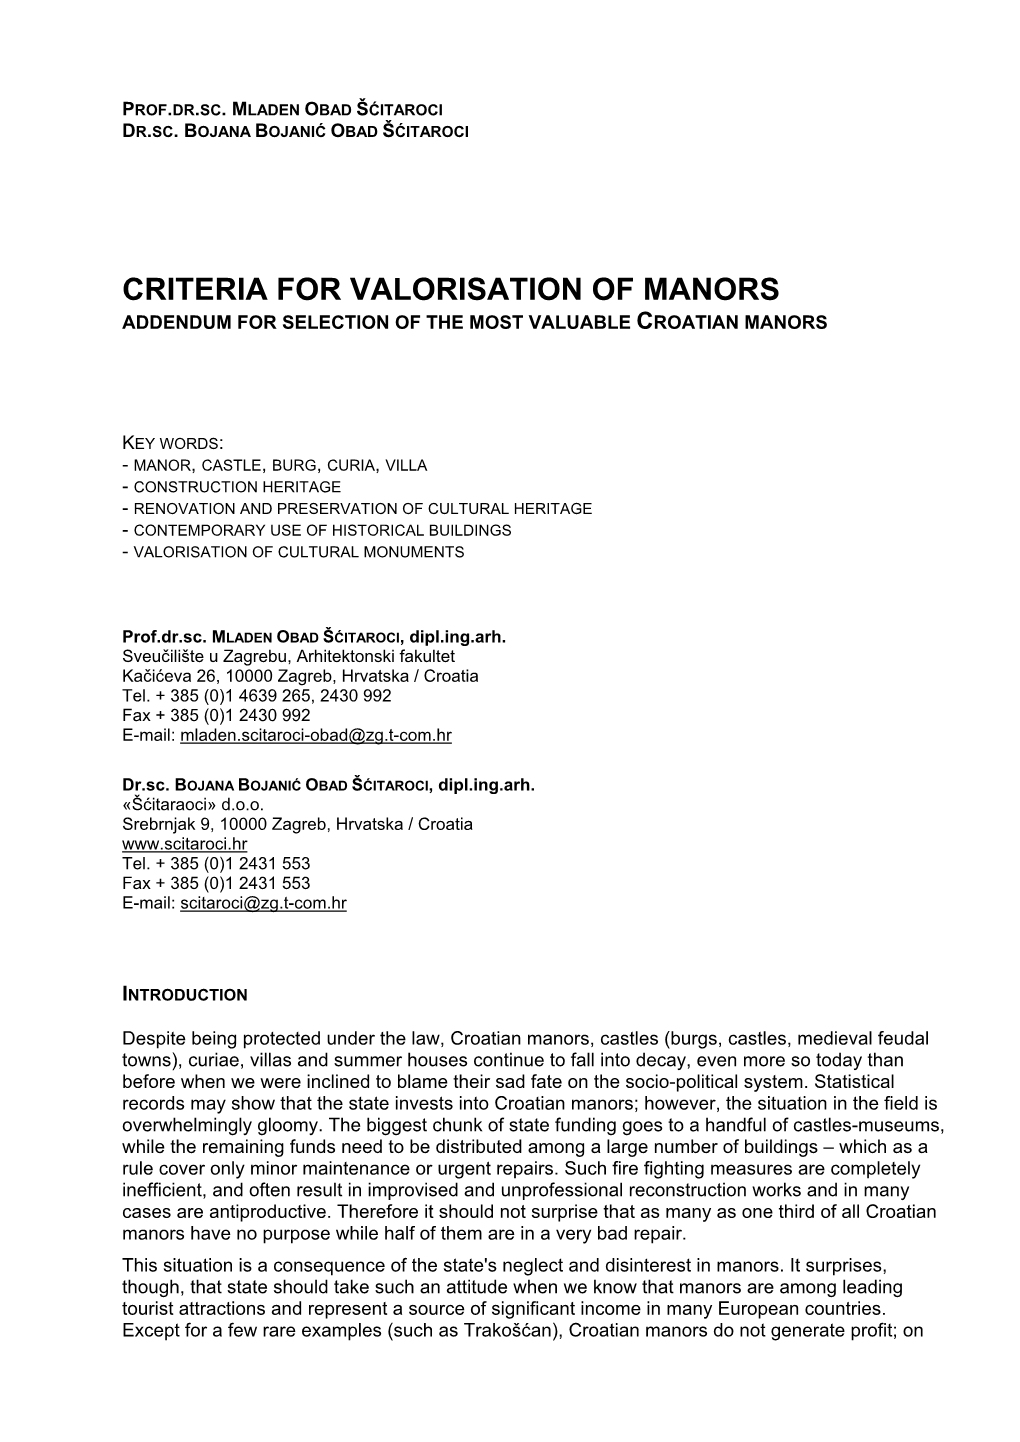 Criteria for Valorisation of Manors Addendum for Selection of the Most Valuable Croatian Manors